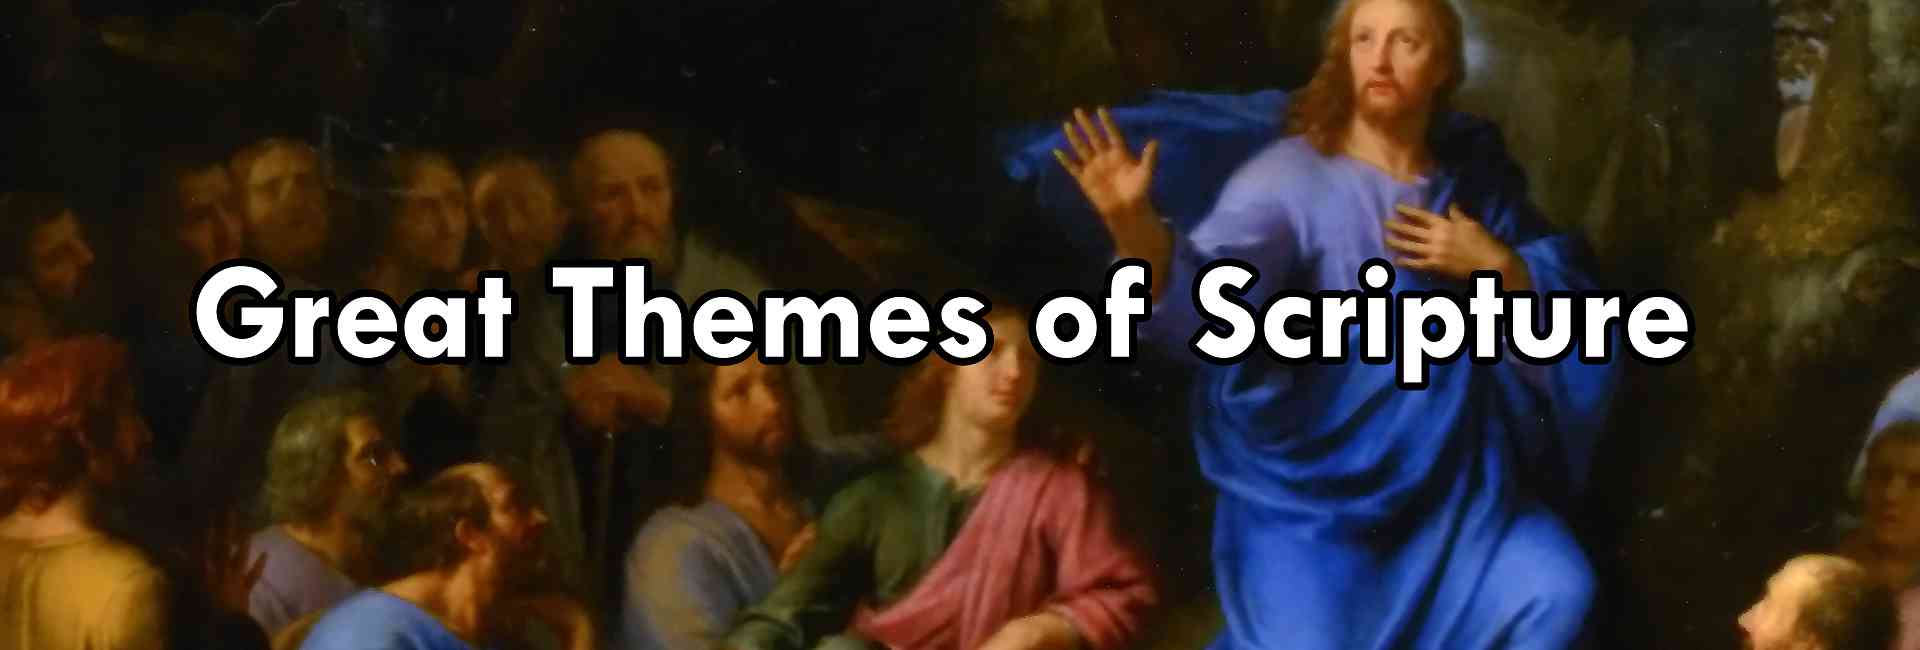 The Great Themes of Scripture